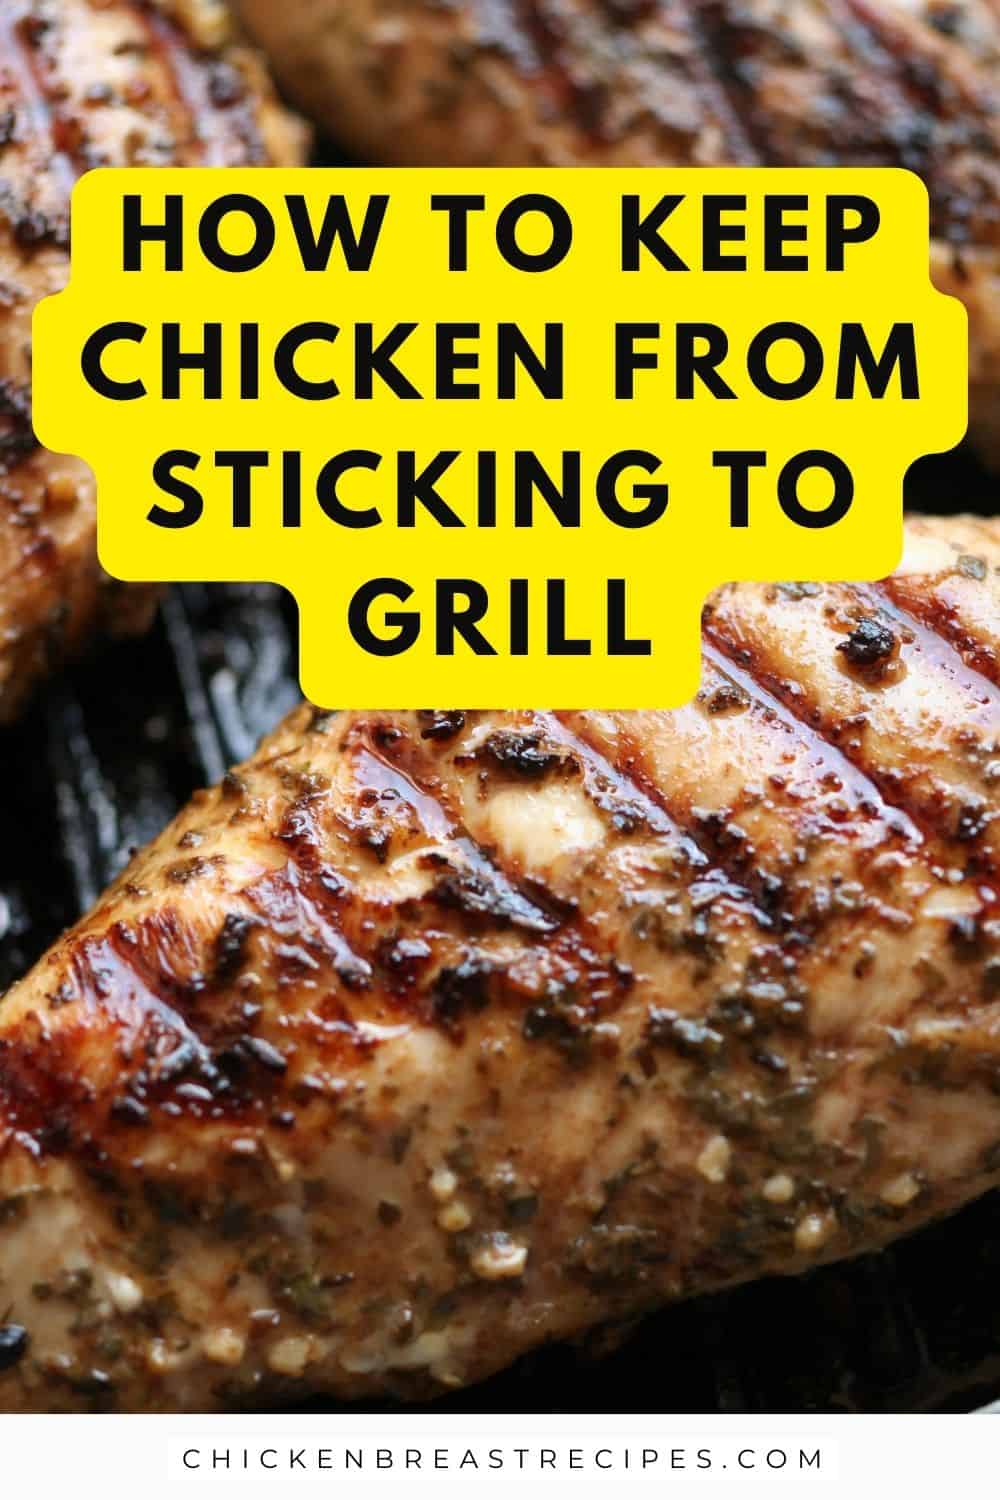 How to Keep Chicken From Sticking to Grill